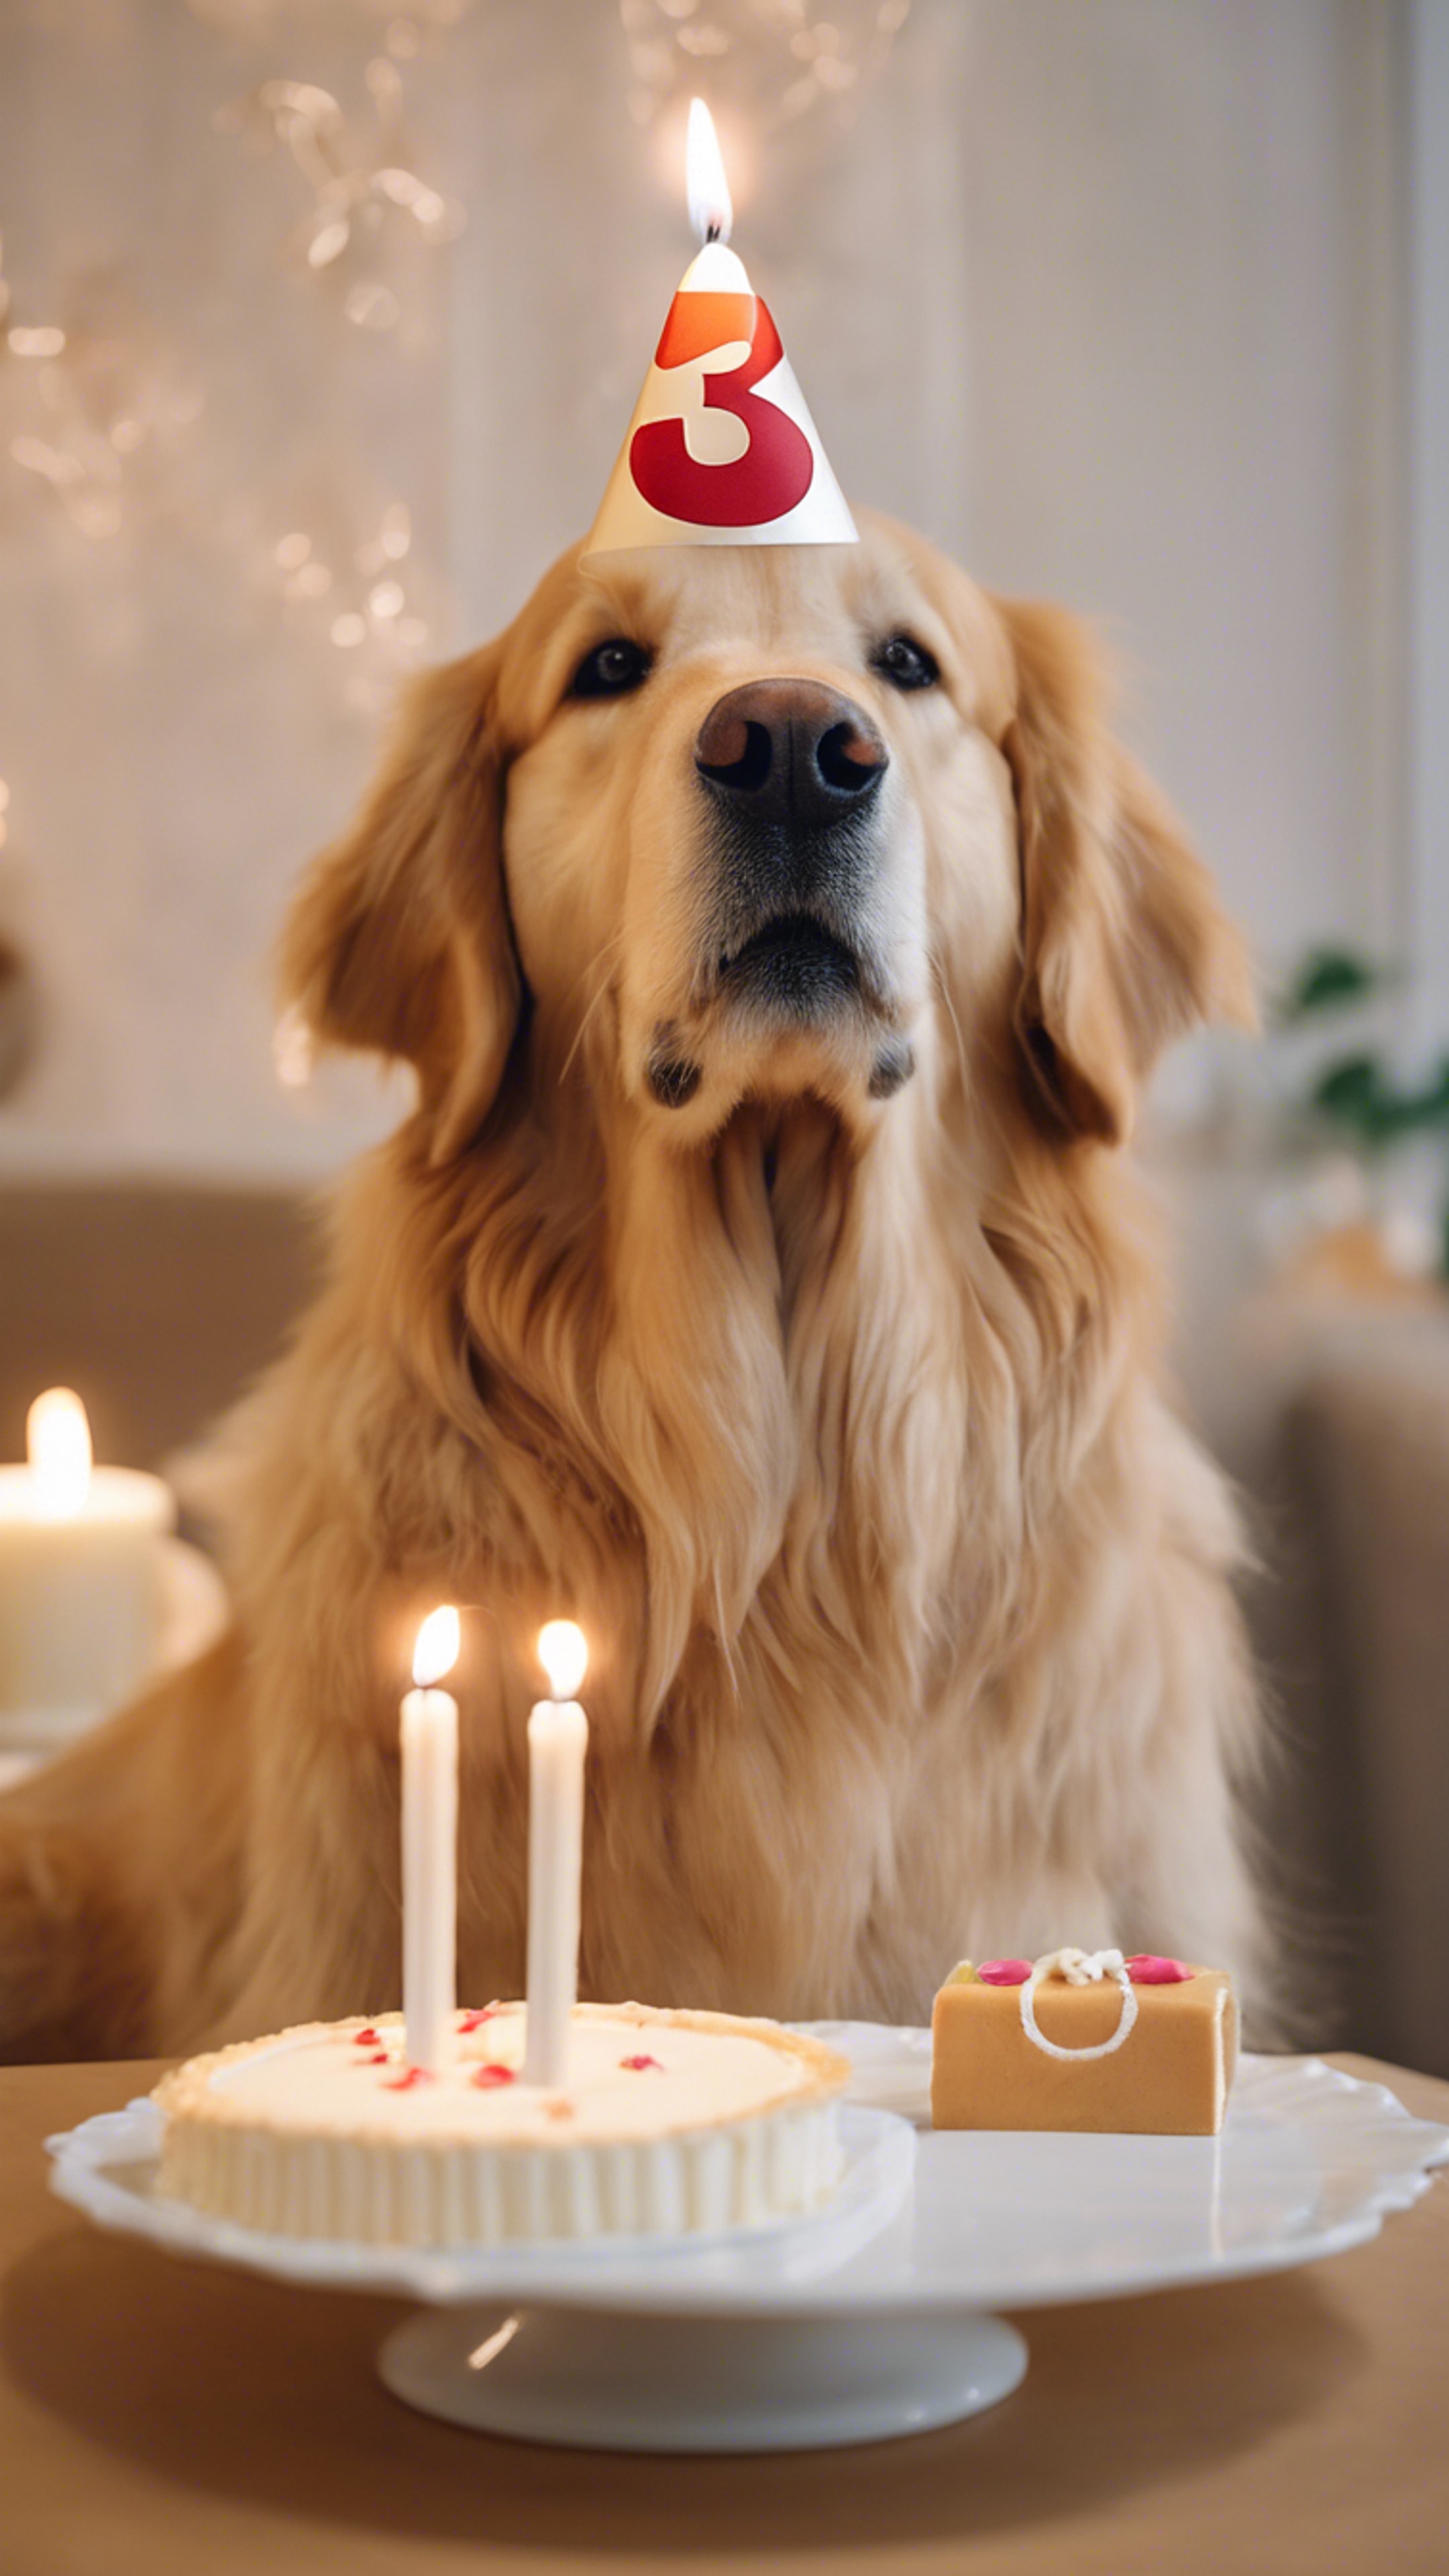 A golden retriever wearing a birthday hat, sitting in front of a numbered '3' candle on a small cake, looking eagerly at the camera. Tapet[271fe240b95e4af1b864]